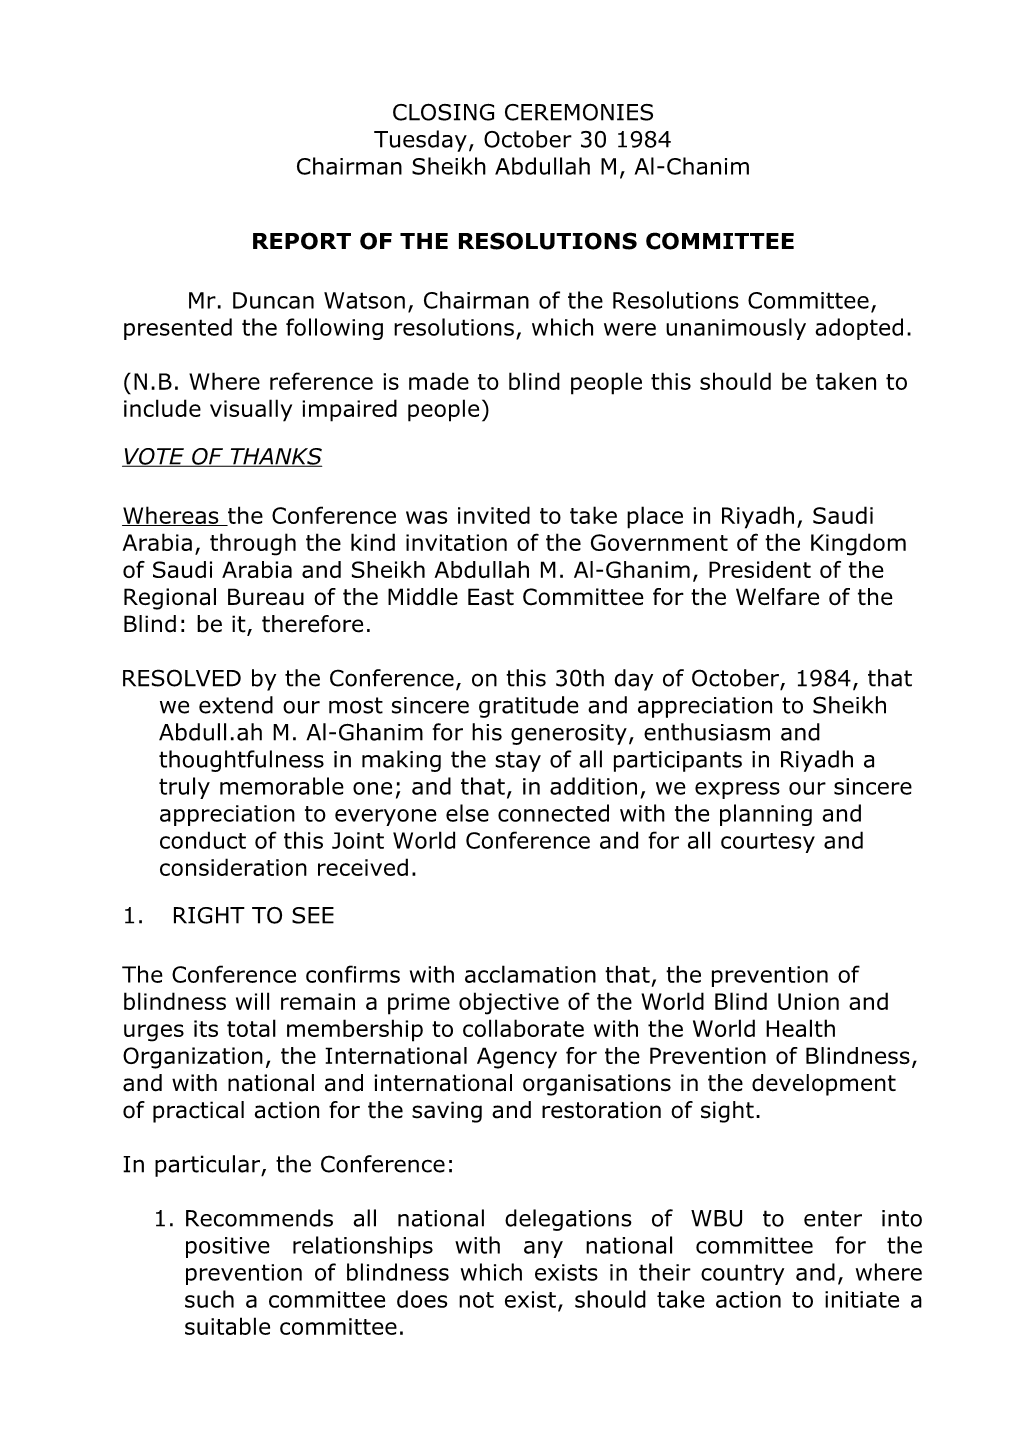 Report of the Resolutions Committee